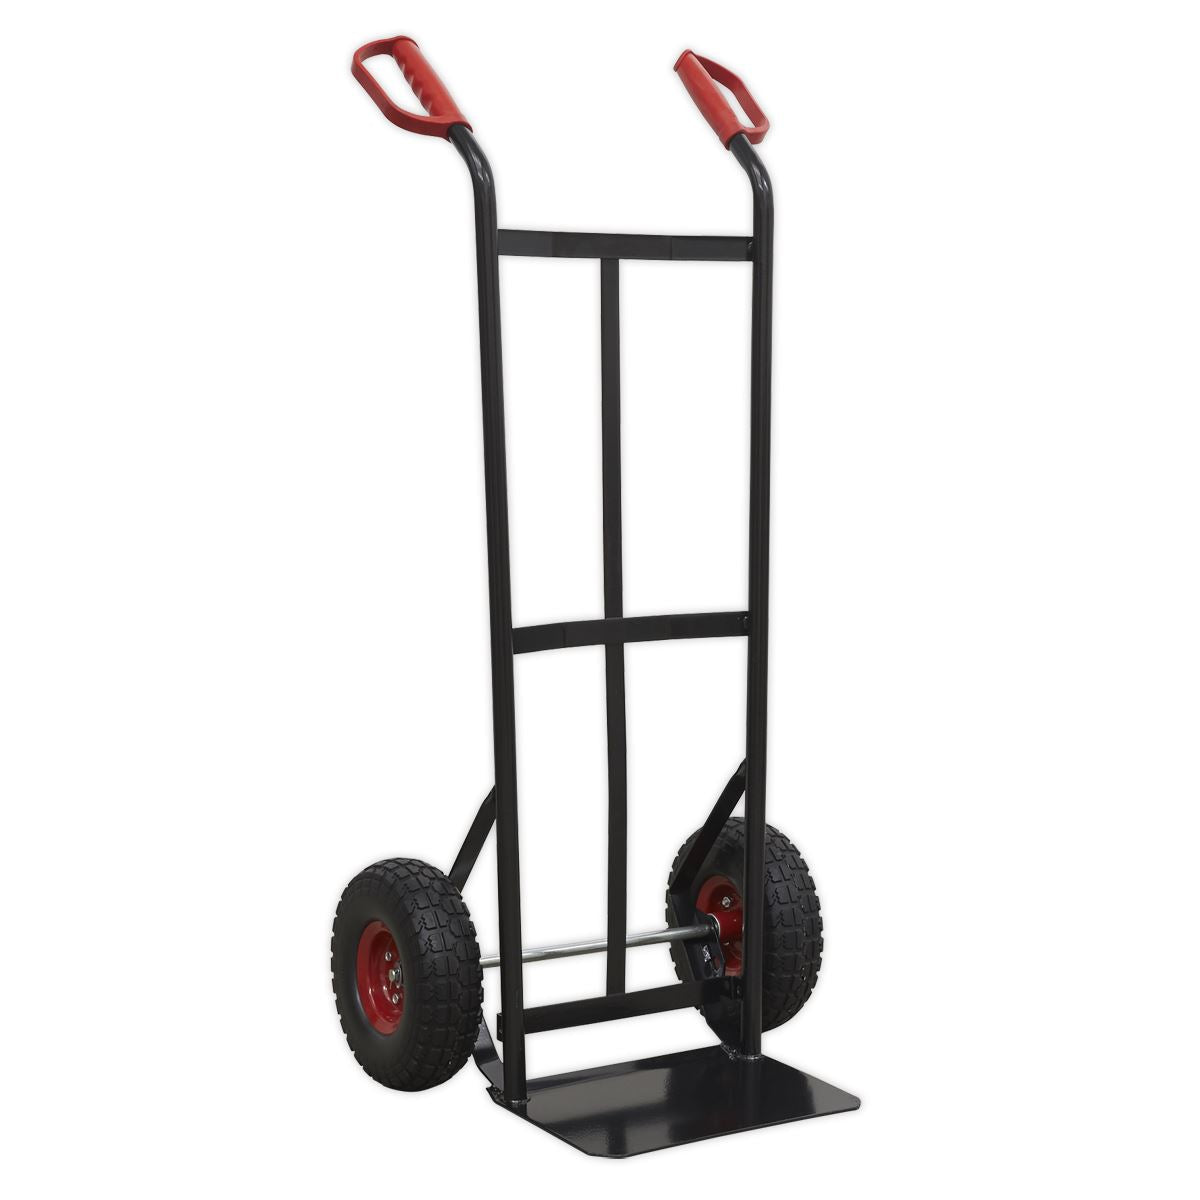 Sealey Premier Heavy-Duty Sack Truck with PU Tyres 250kg Capacity